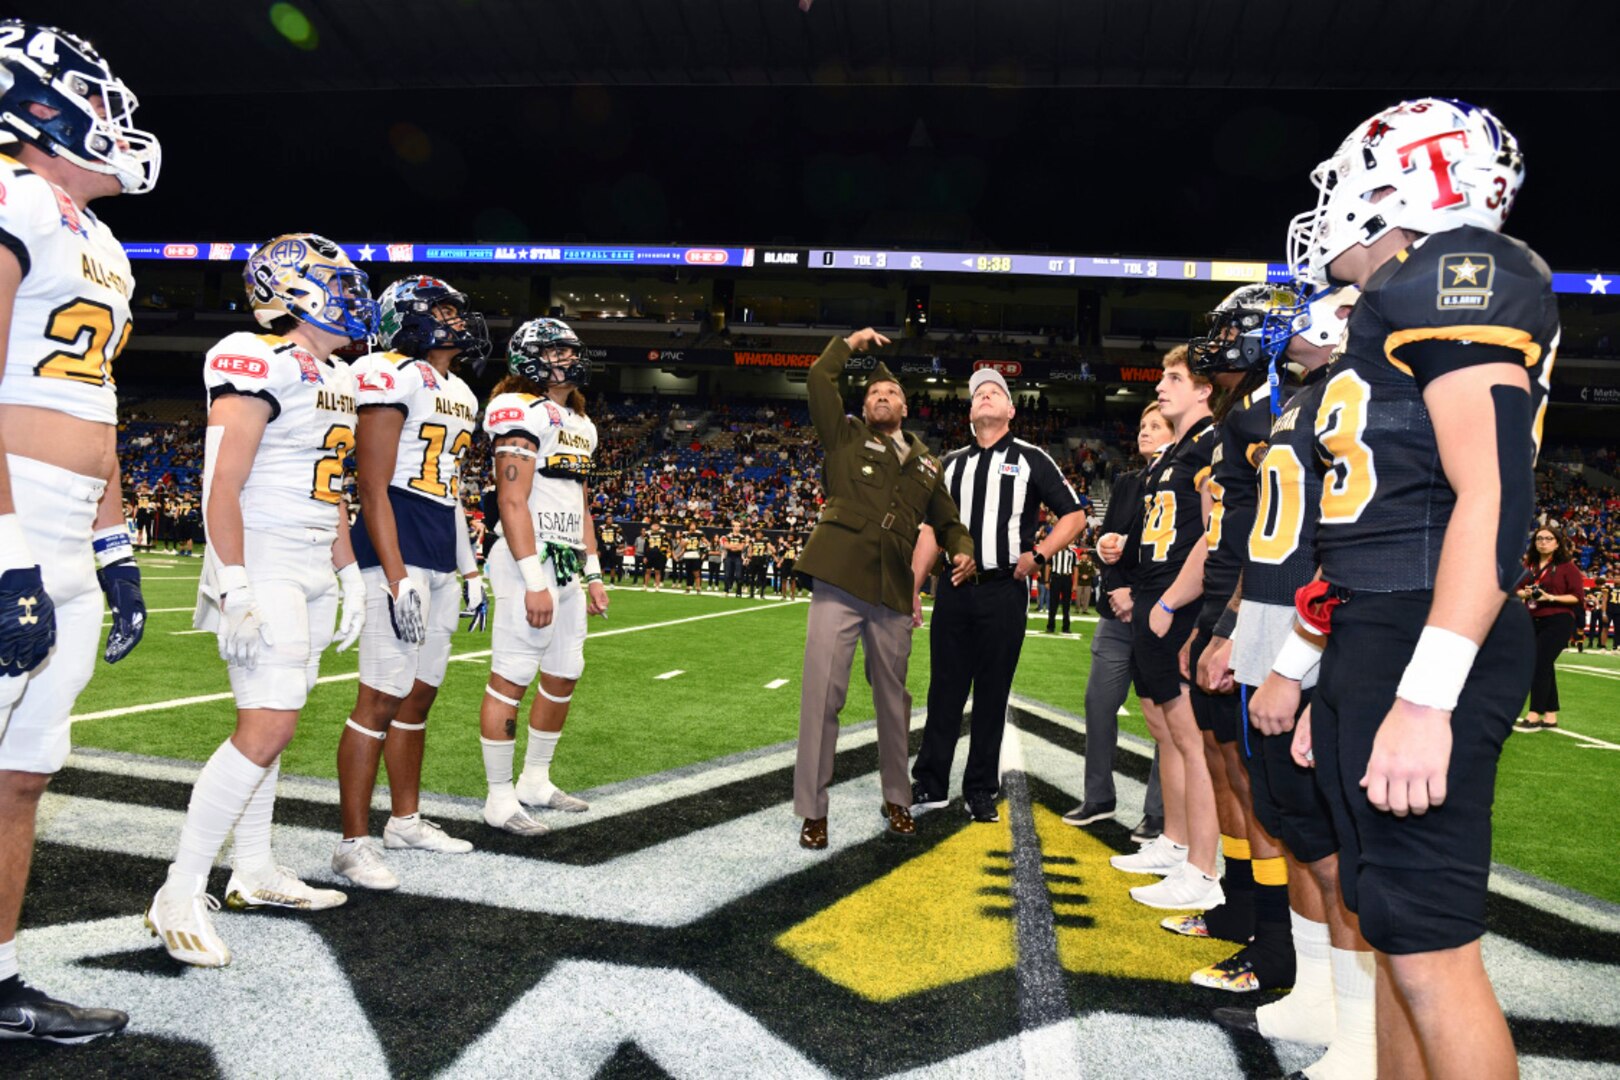 MEDCoE commanding general swears in recruits at San Antonio Sports All-Star Football Game